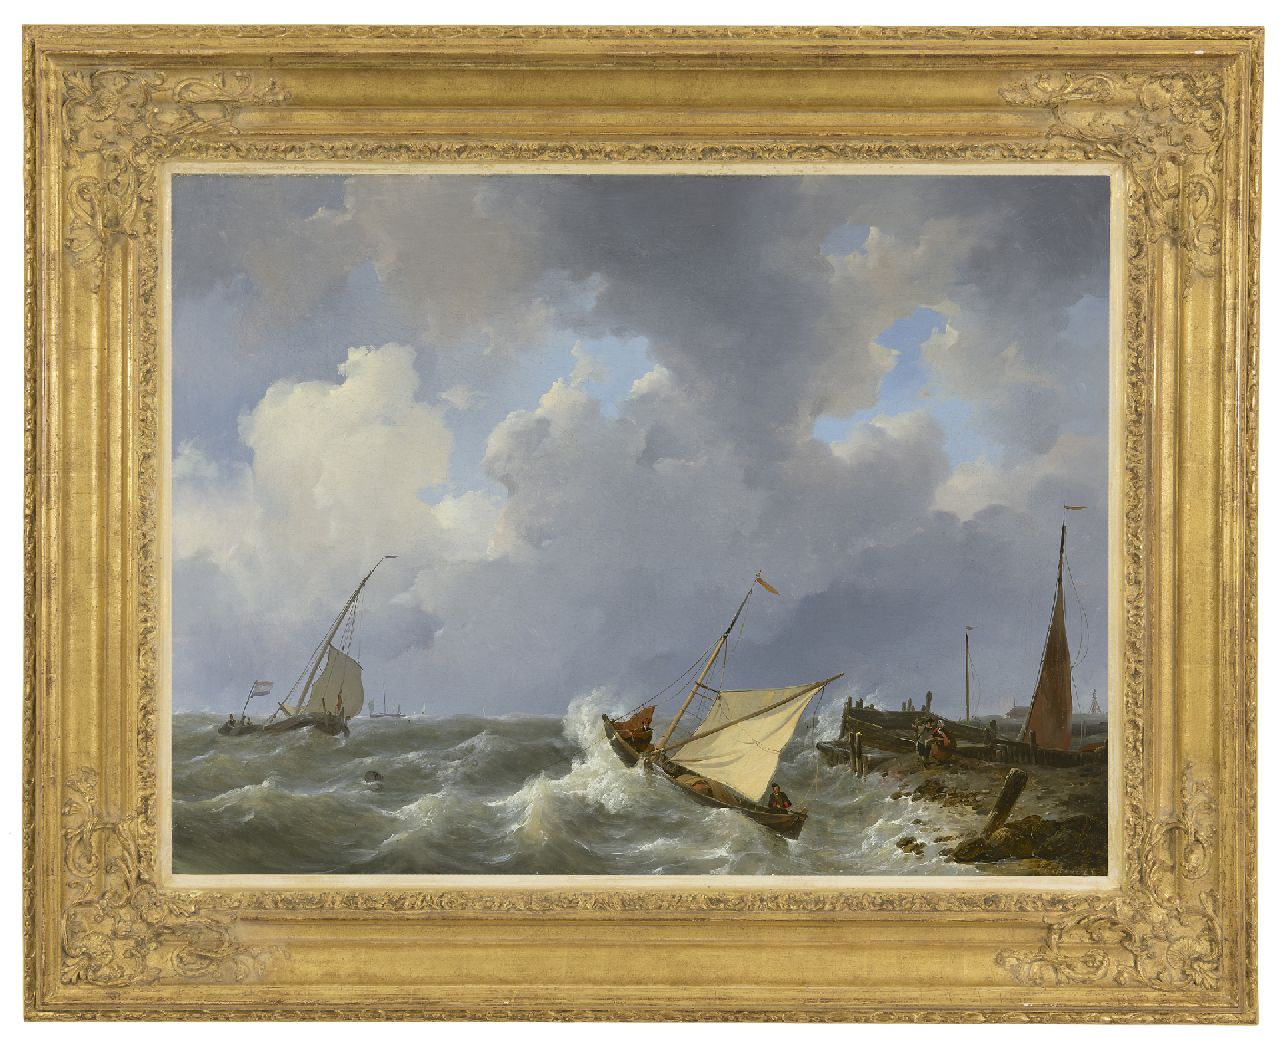 Schotel J.C.  | Johannes Christianus Schotel, Sailing ships on a choppy sea near a harbour, oil on canvas 55.6 x 73.4 cm, signed l.r. and dated 1825